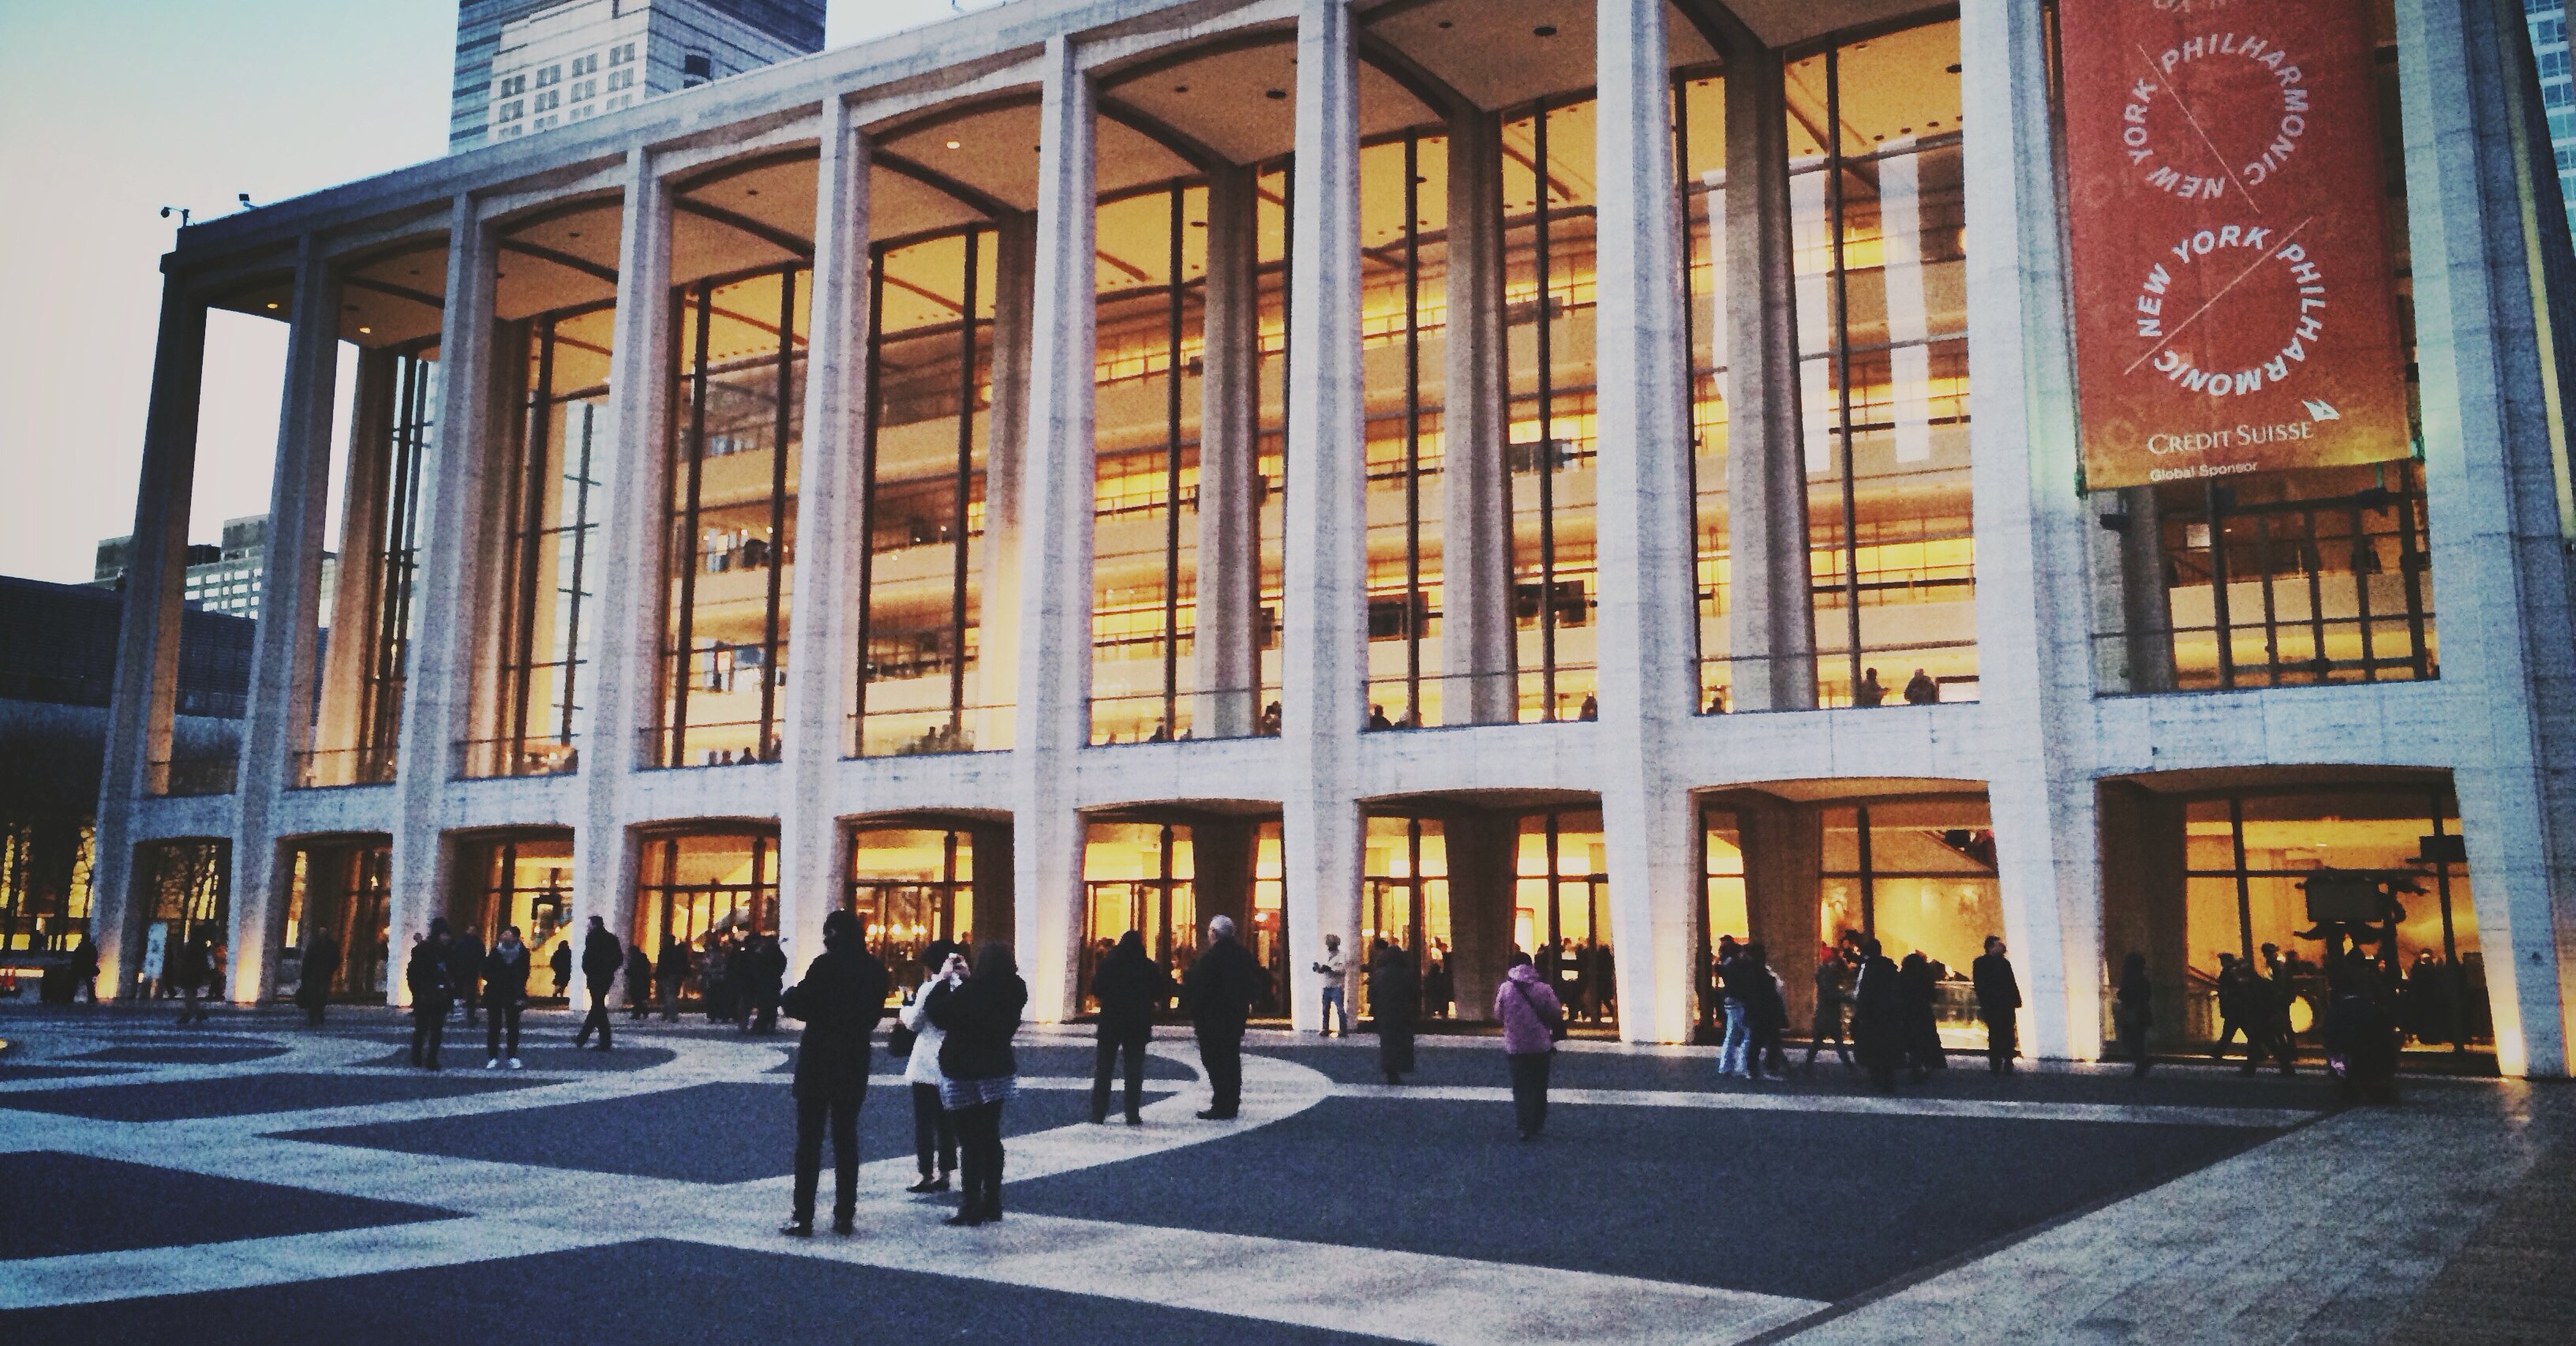 Events and Performances This Month at Lincoln Center December 2017